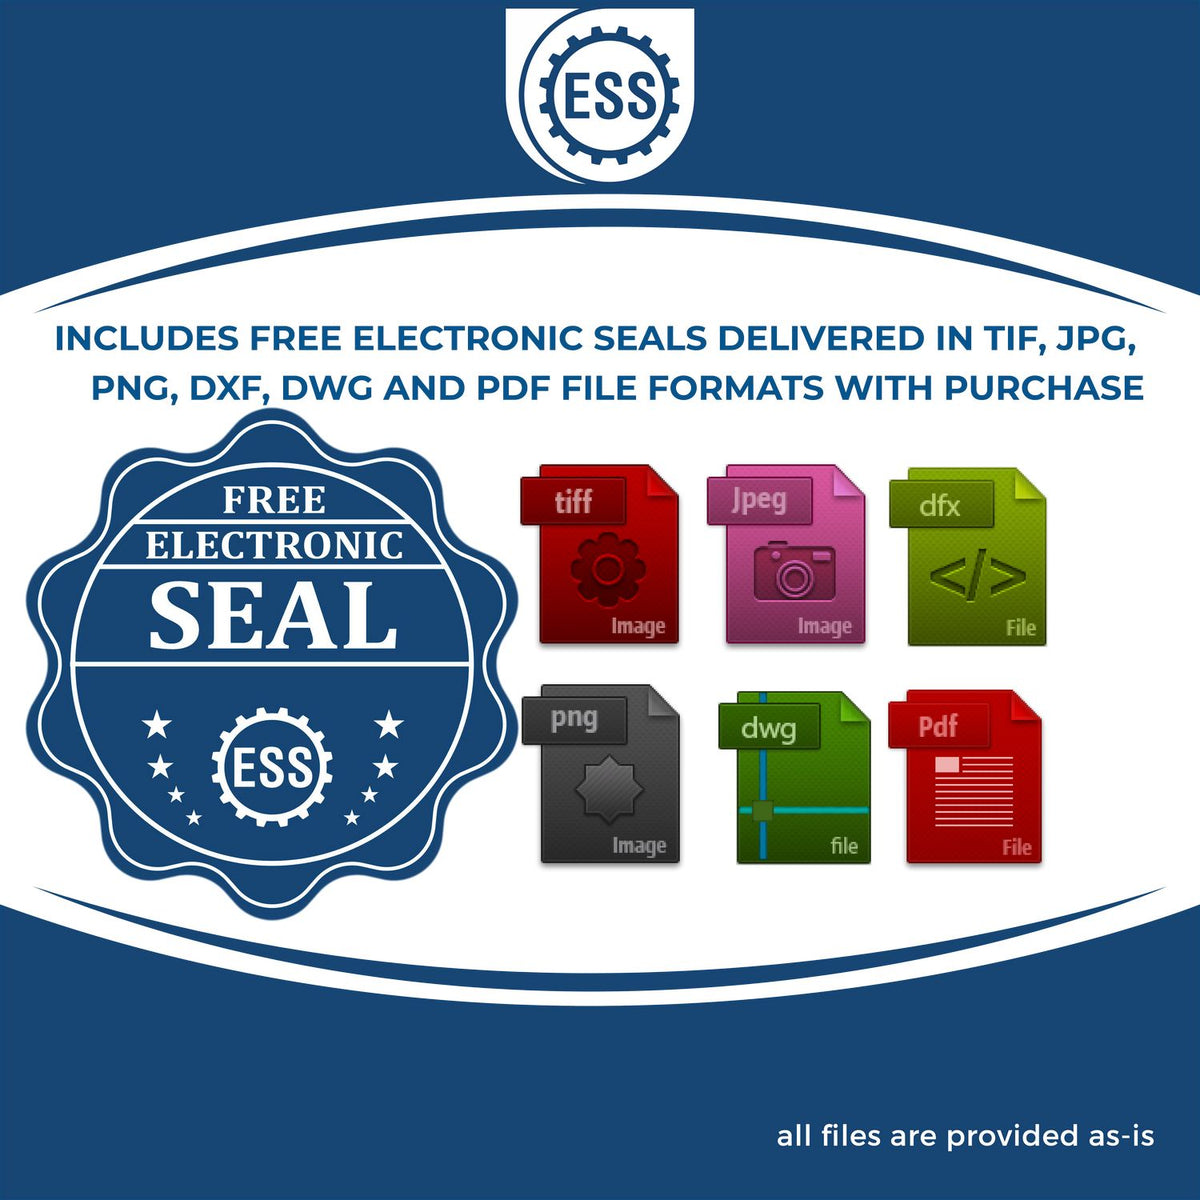 An infographic for the free electronic seal for the Premium MaxLight Pre-Inked Kansas Geology Stamp illustrating the different file type icons such as DXF, DWG, TIF, JPG and PNG.